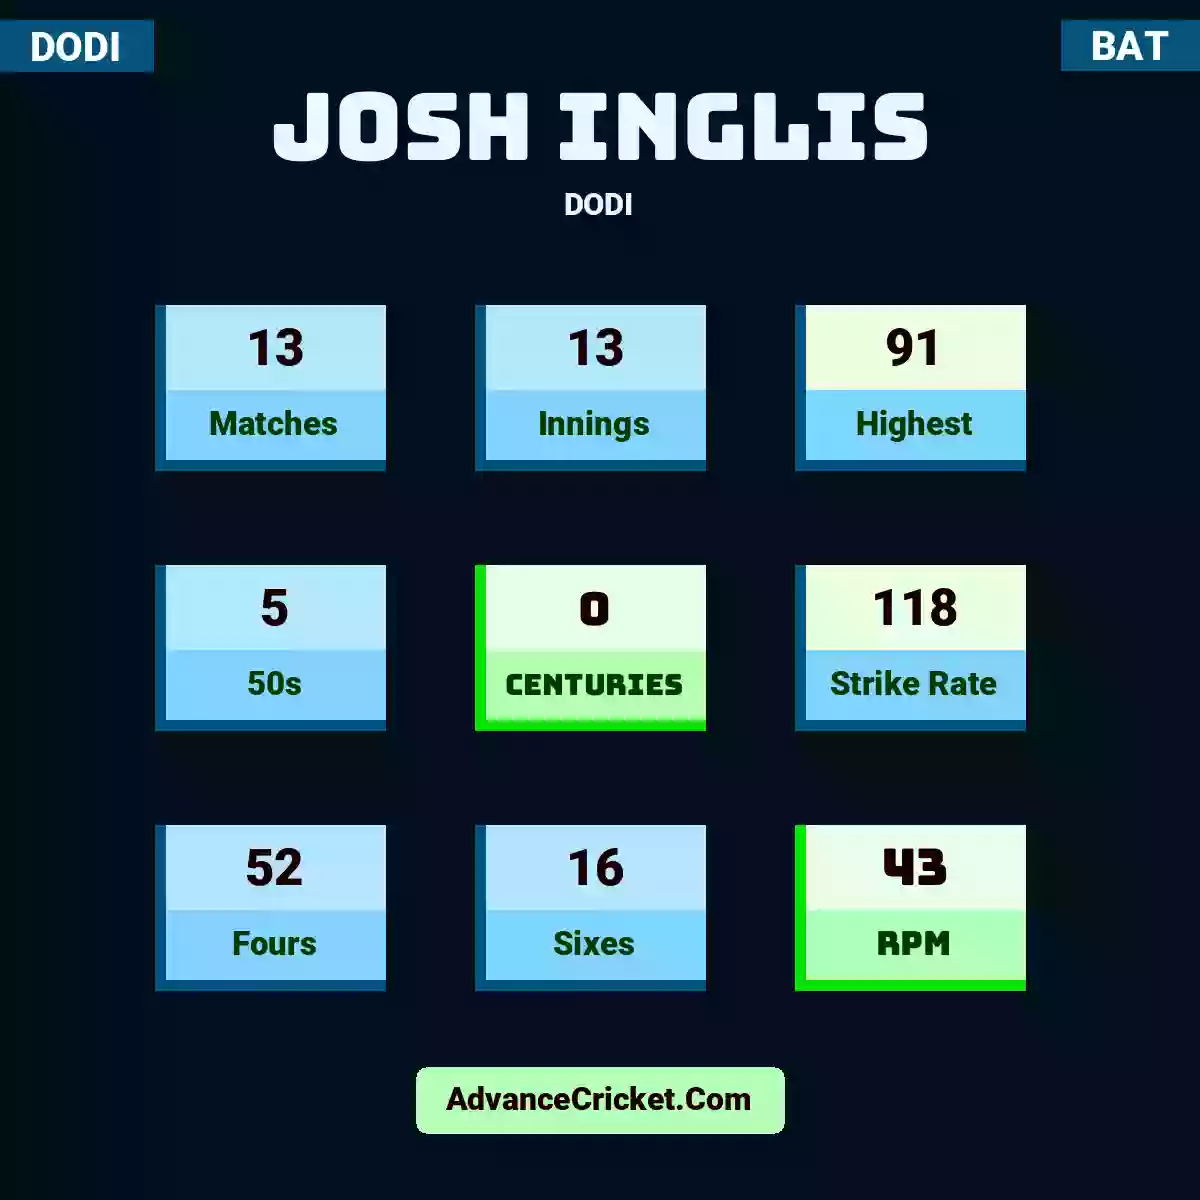 Josh Inglis DODI , Josh Inglis played 13 matches, scored 91 runs as highest, 5 half-centuries, and 0 centuries, with a strike rate of 118. J.Inglis hit 52 fours and 16 sixes, with an RPM of 43.